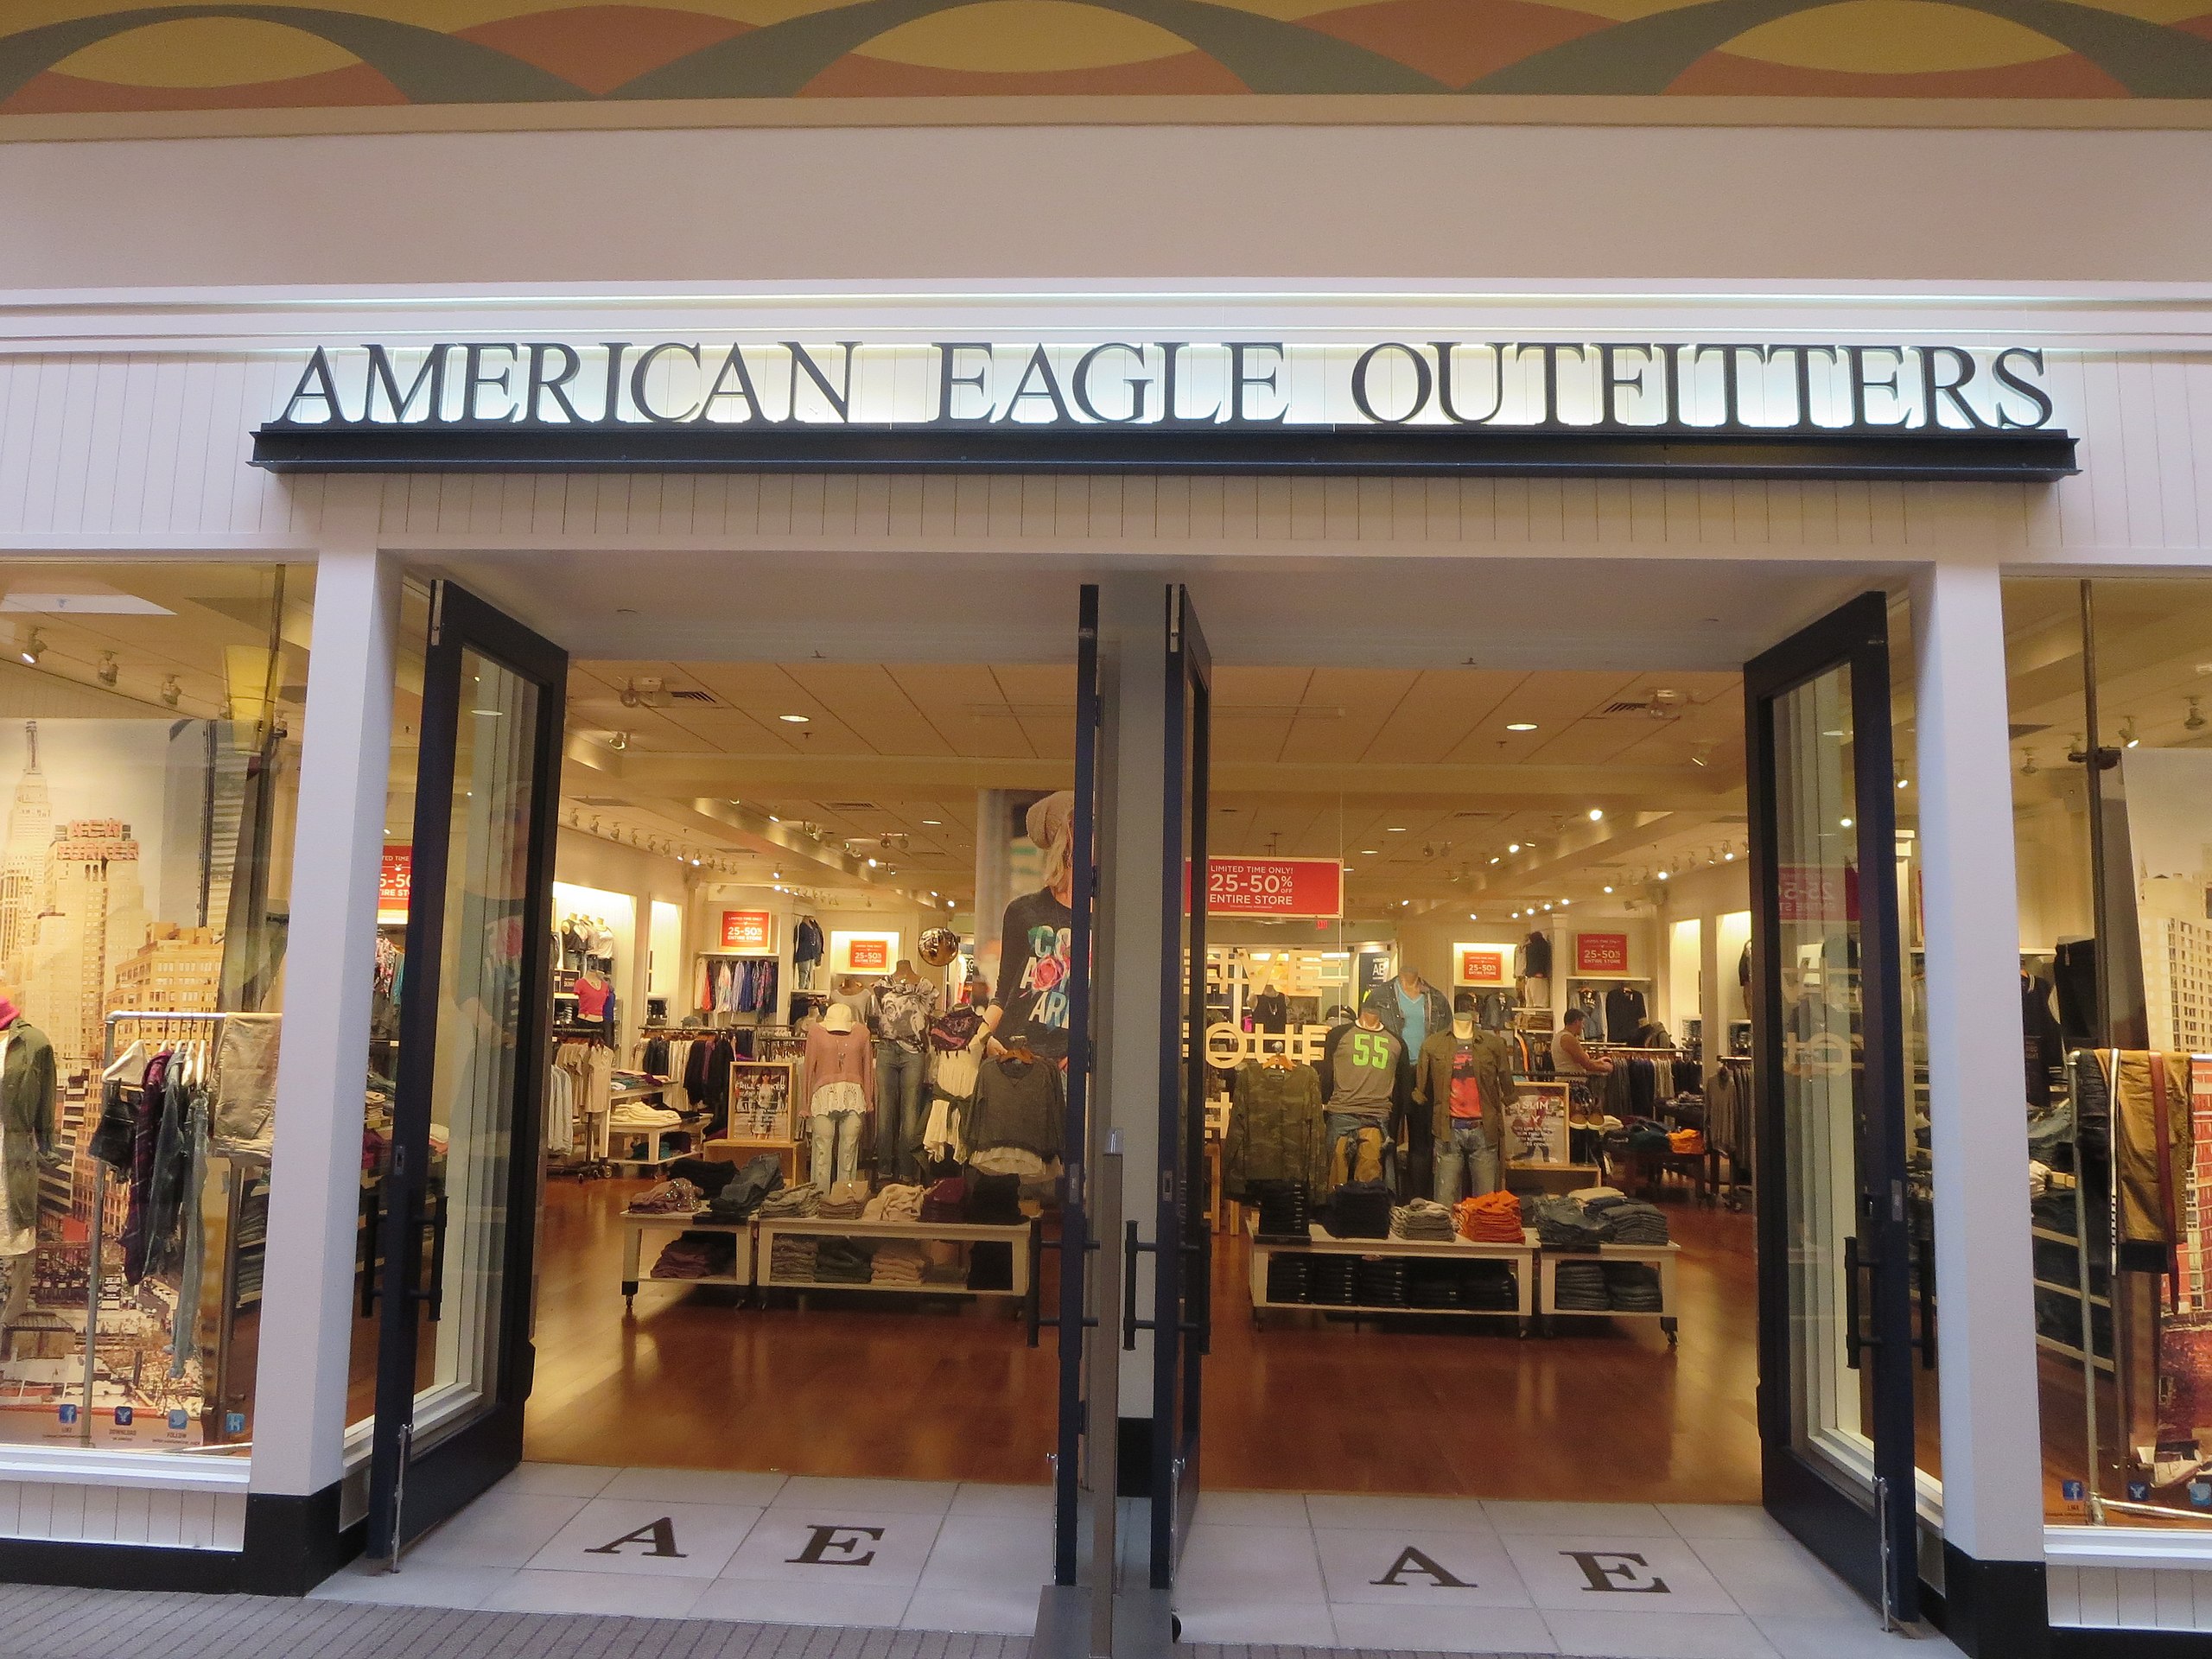 American Eagle Outfitters - Wikipedia